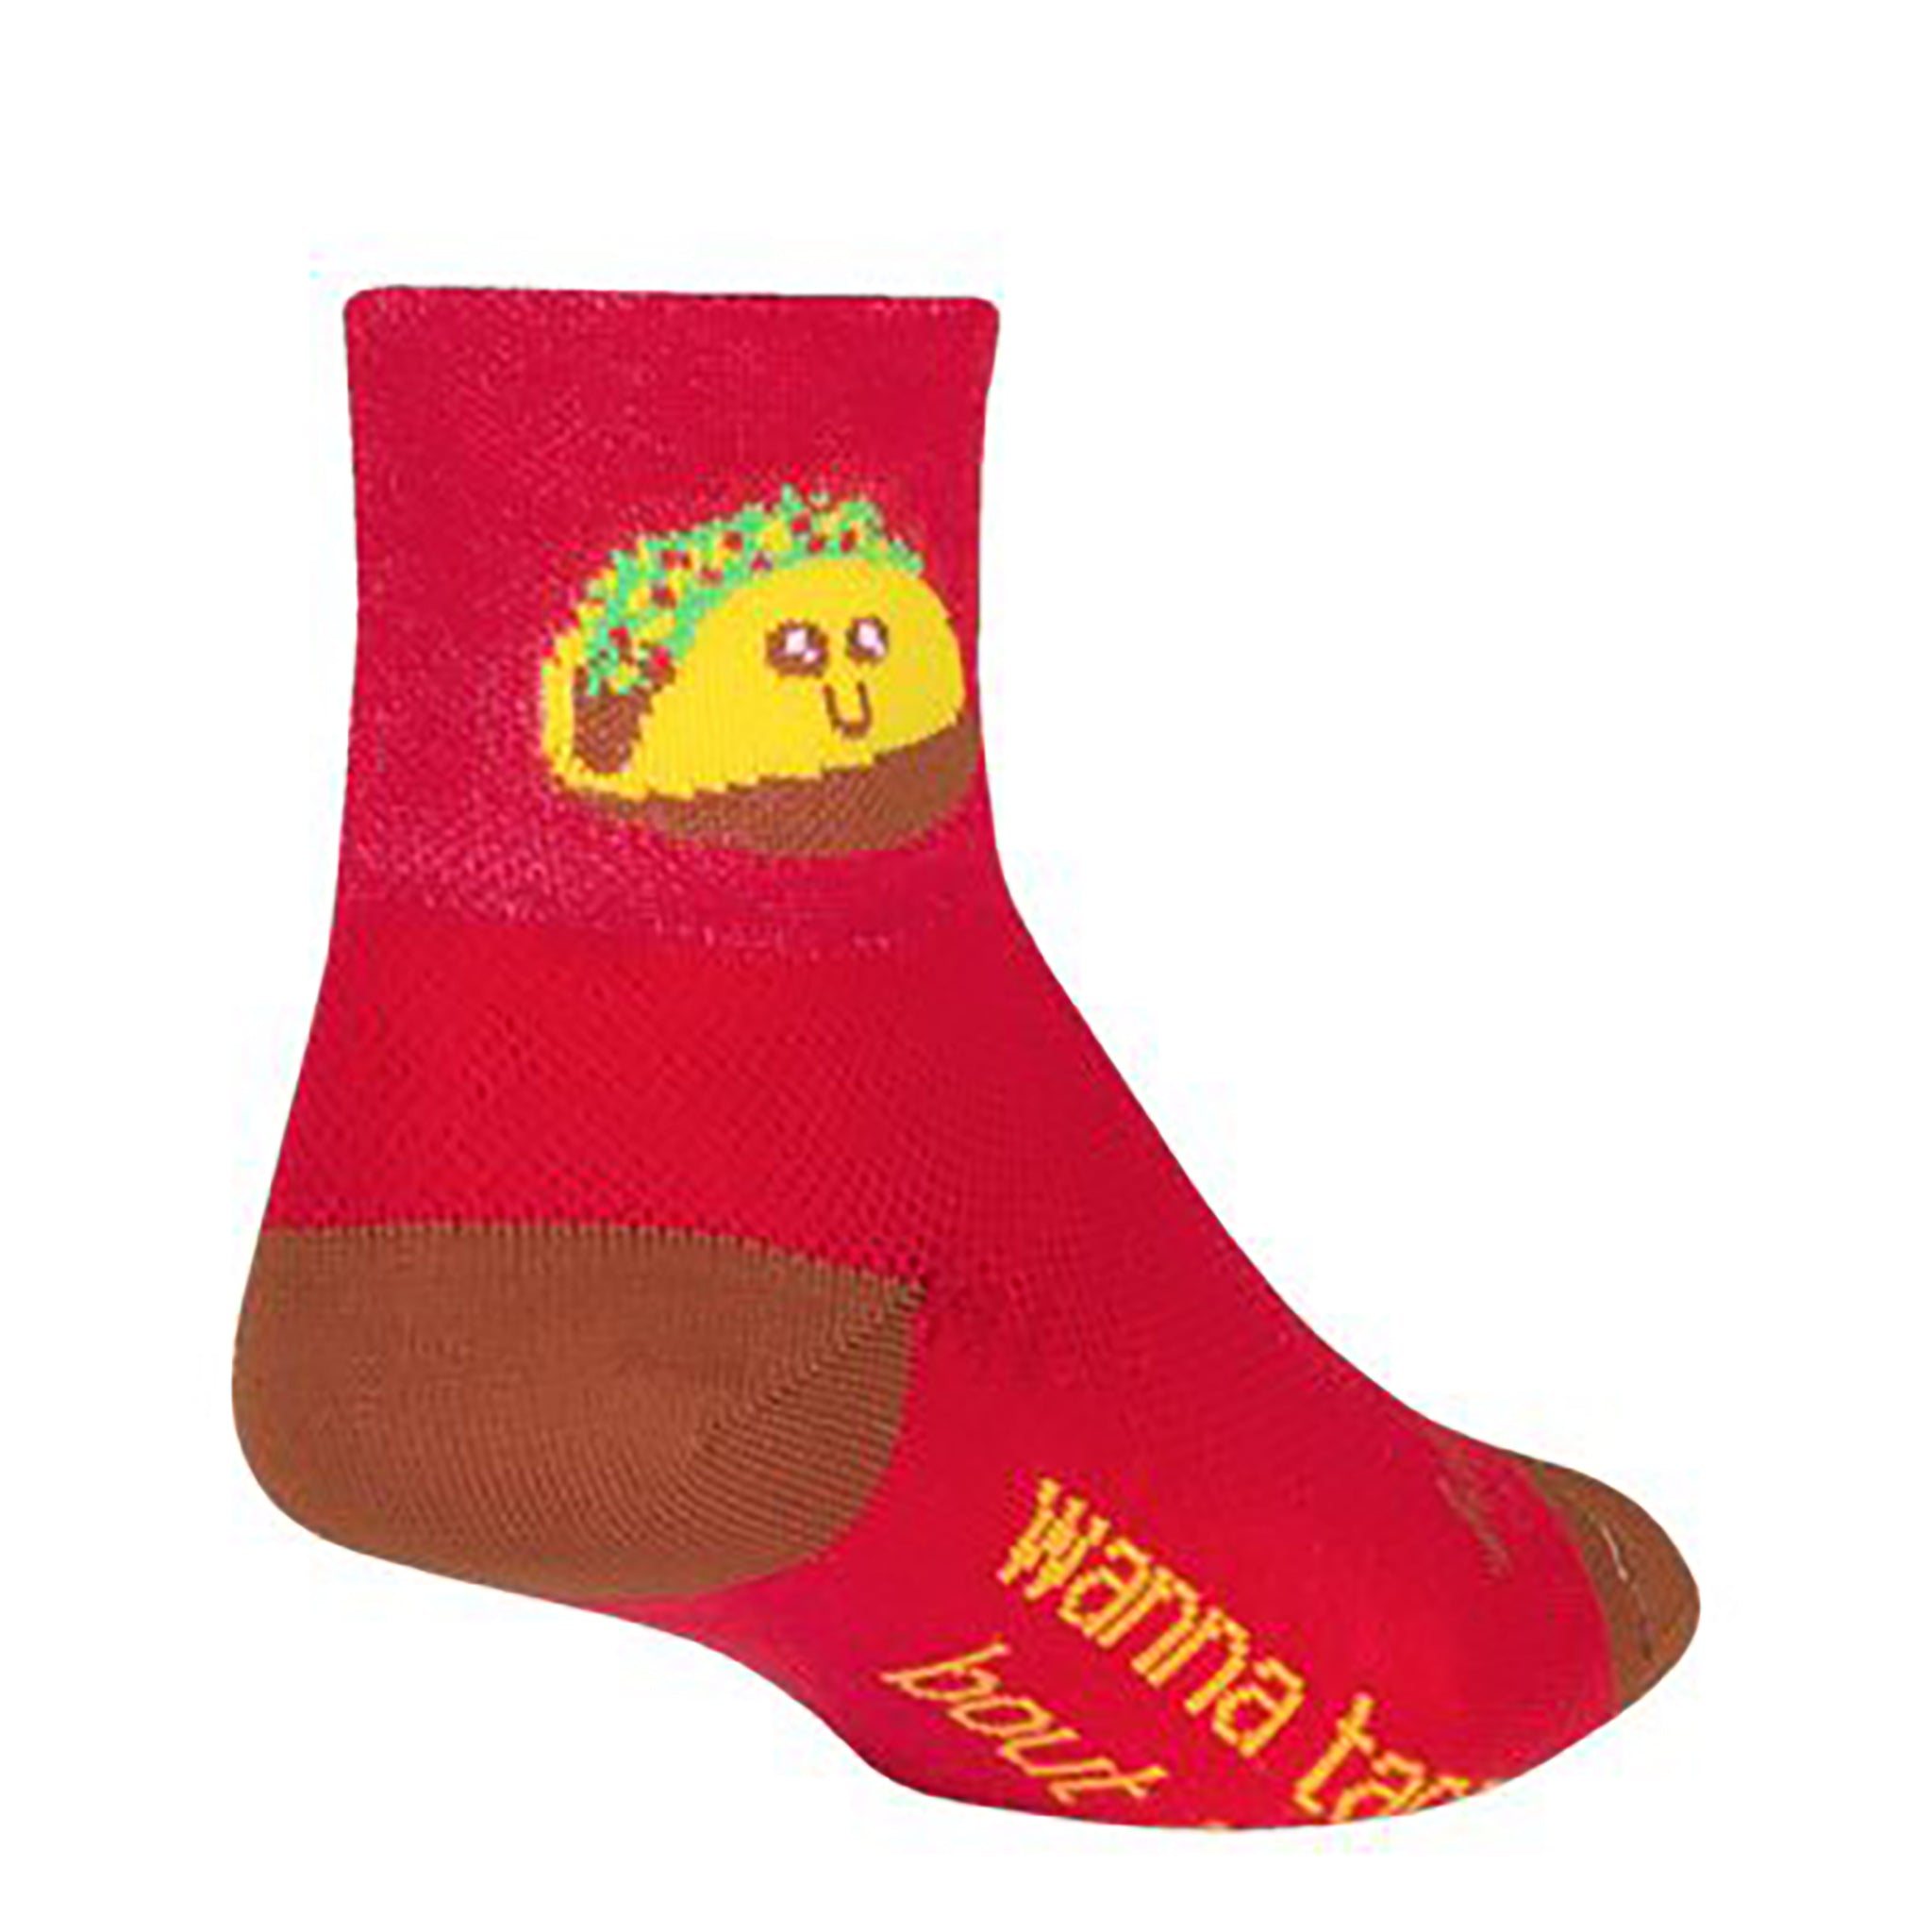 Sockguy Tacotherapy Socks 9-13 Red/Yellow